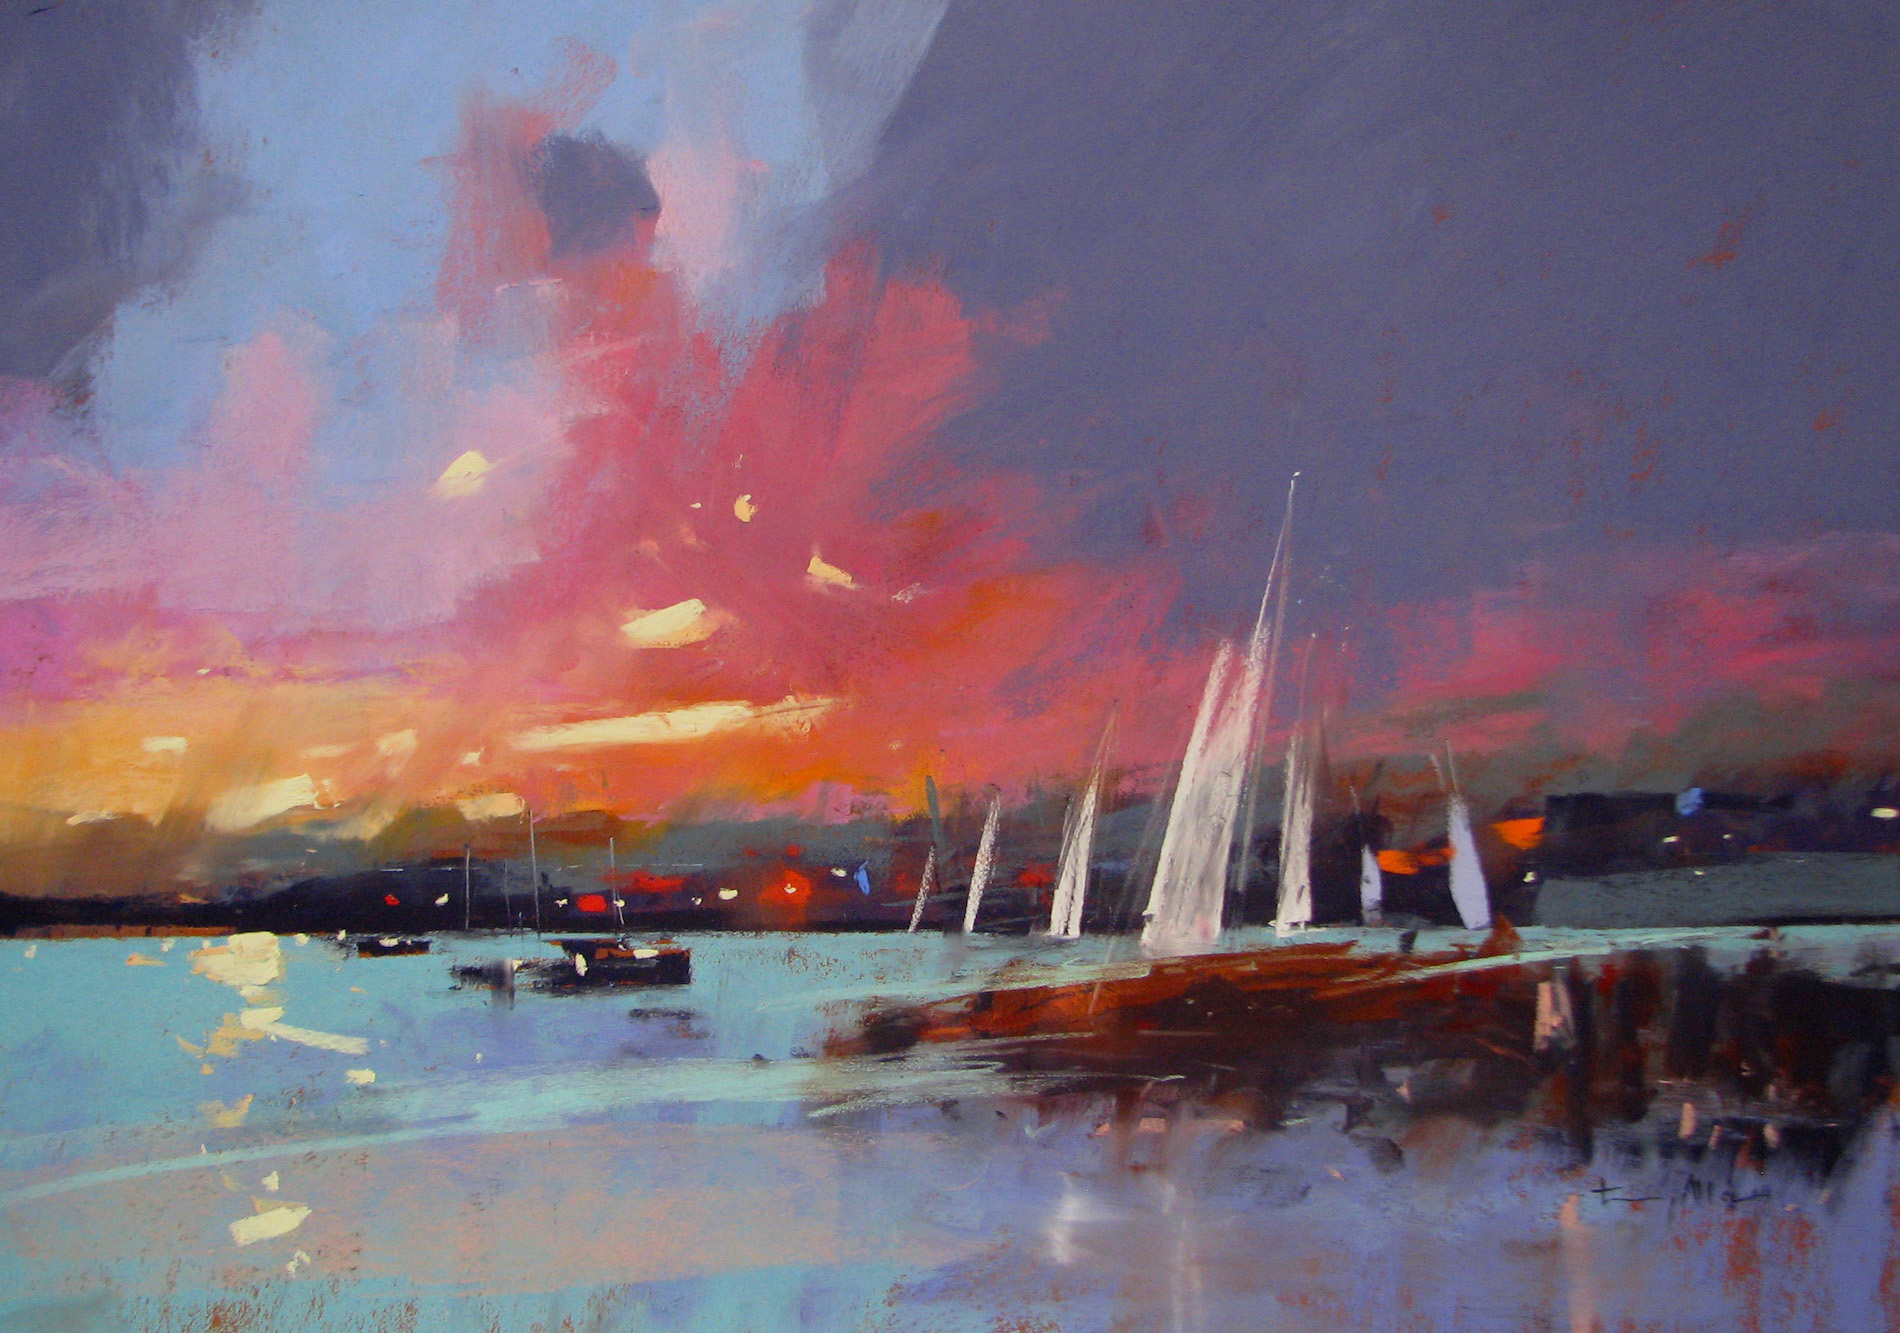 Tony Allain, "Sunset on the Fal," pastel on Colourfix paper, 18 x 26 in 